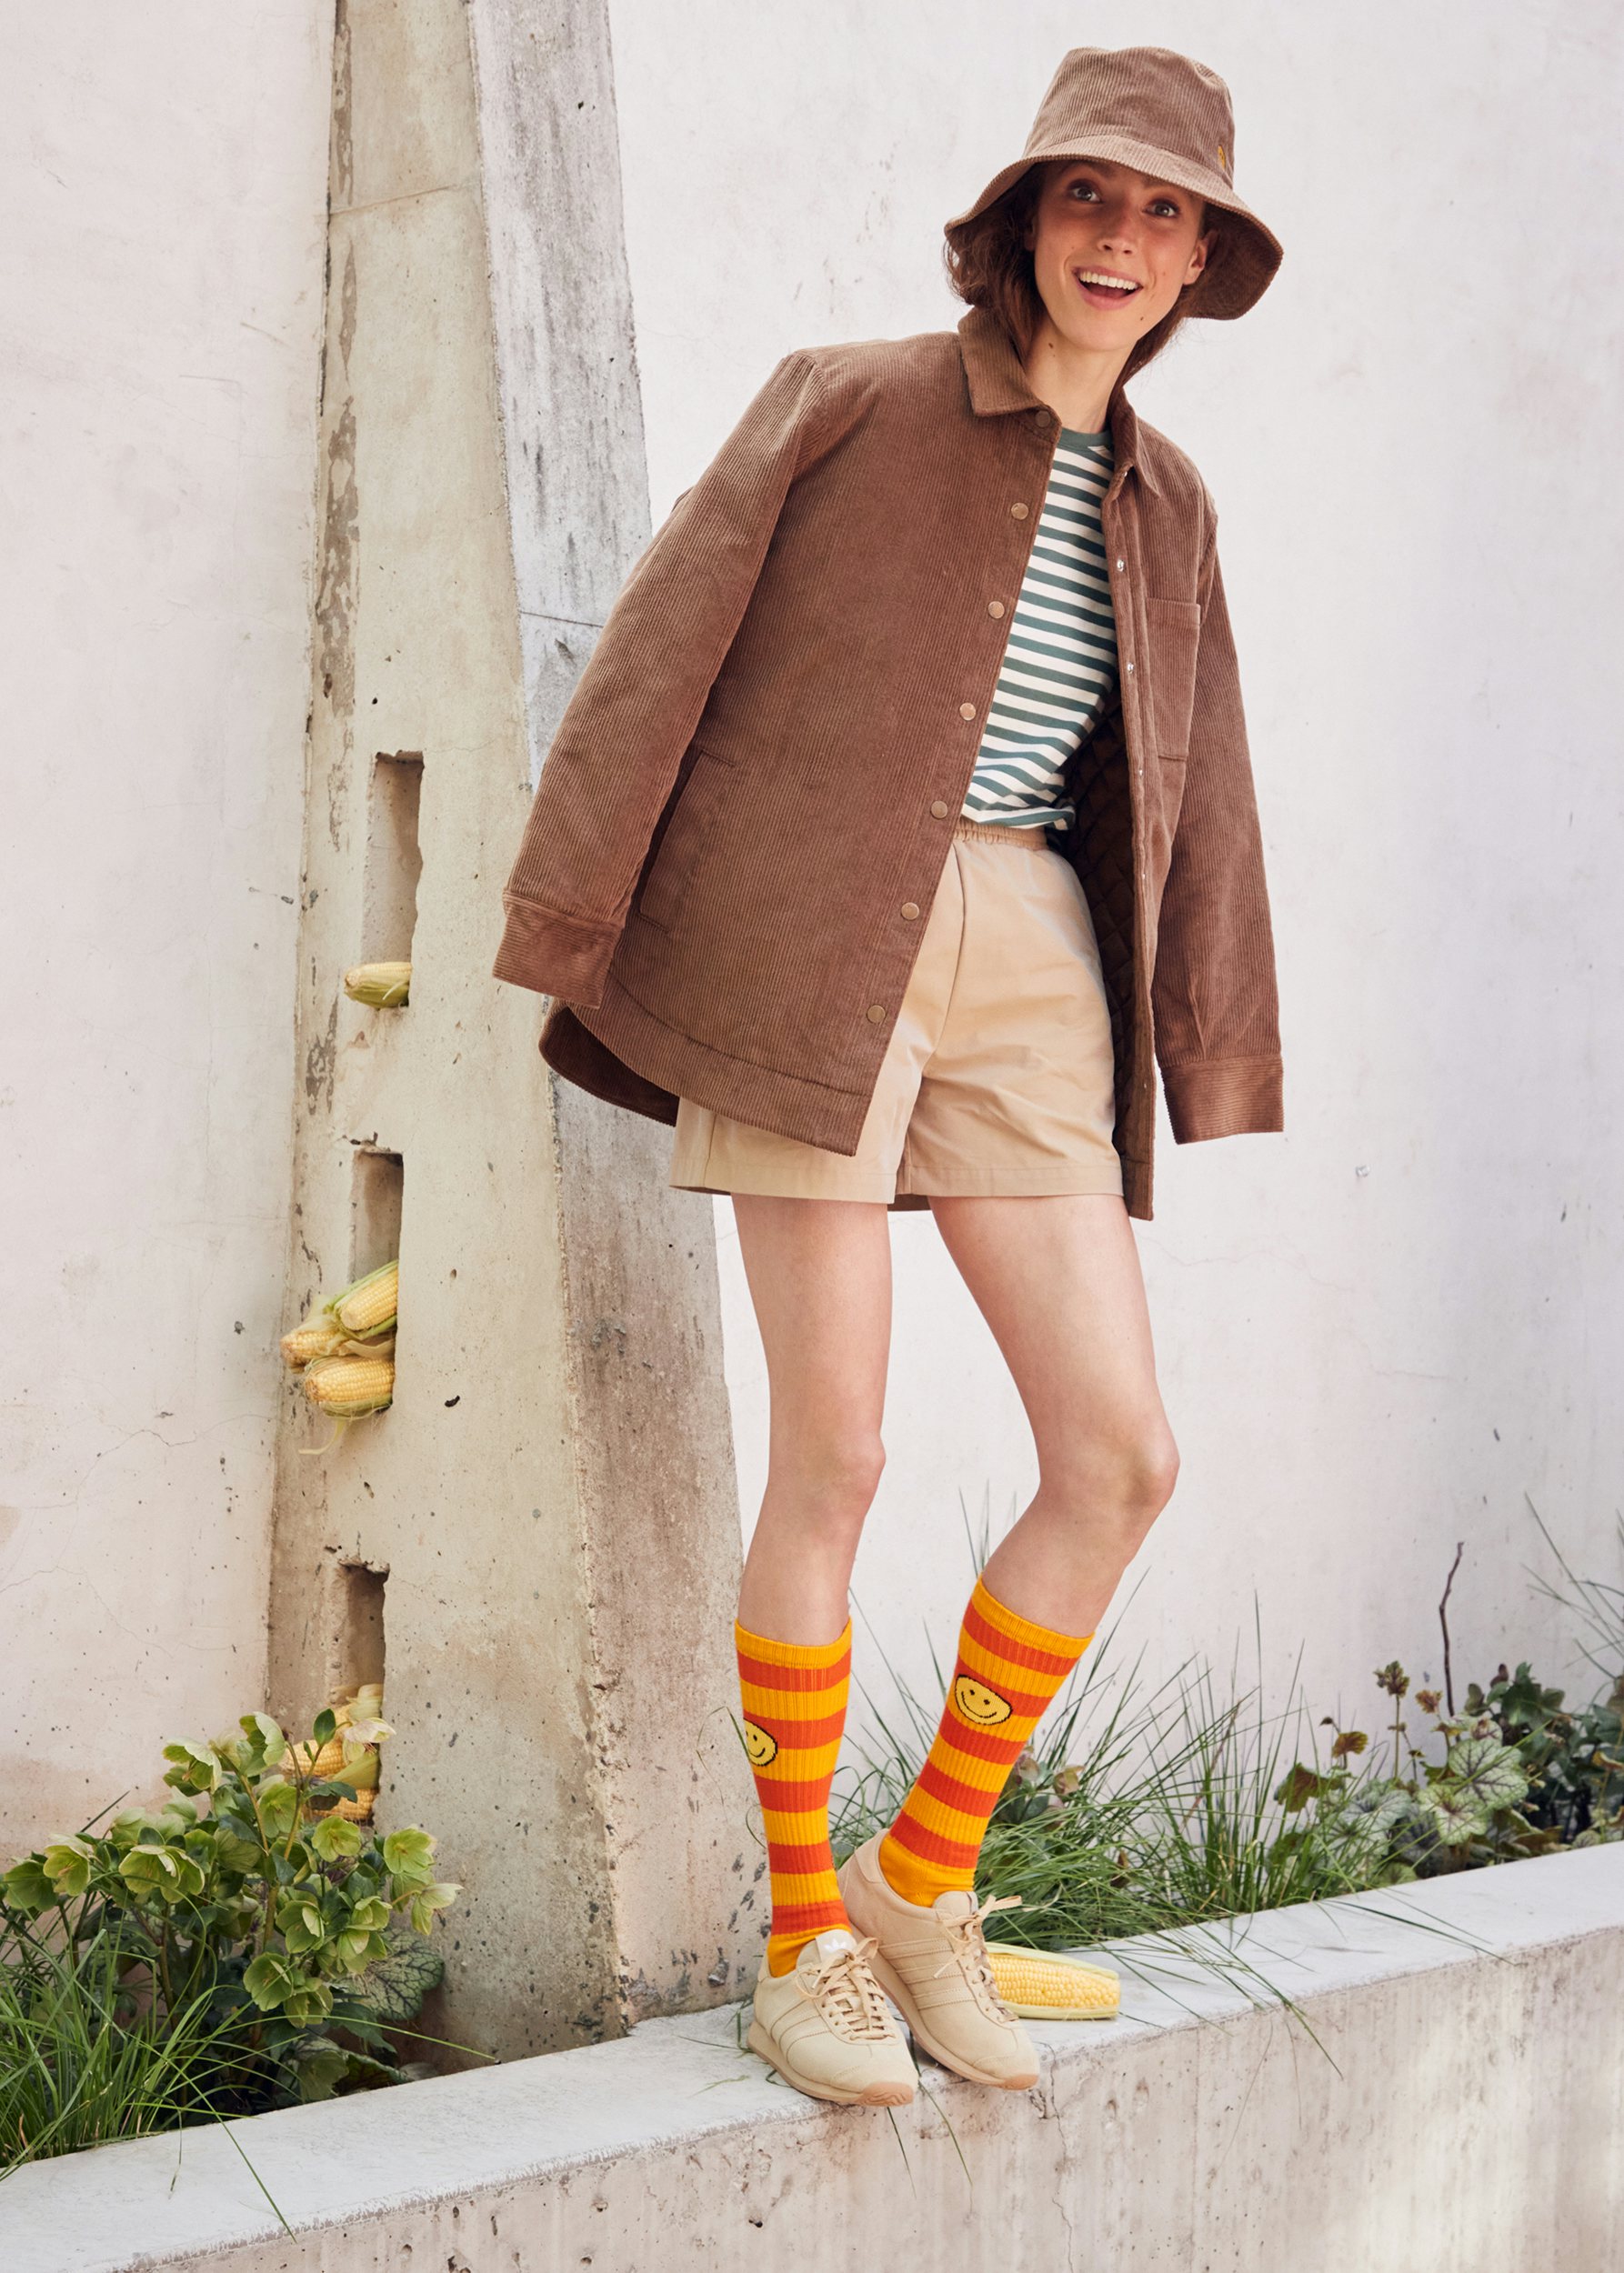 Model wearing the new KULE Bucket Hat in corduroy khaki, paired with the new Dante outerwear jacket in the new fall color, latte. She is also sporting khaki shorts (not sold at KULE), a Modern Long tee in Forest/Cream, and knee-high rugby socks in Gold/Poppy.